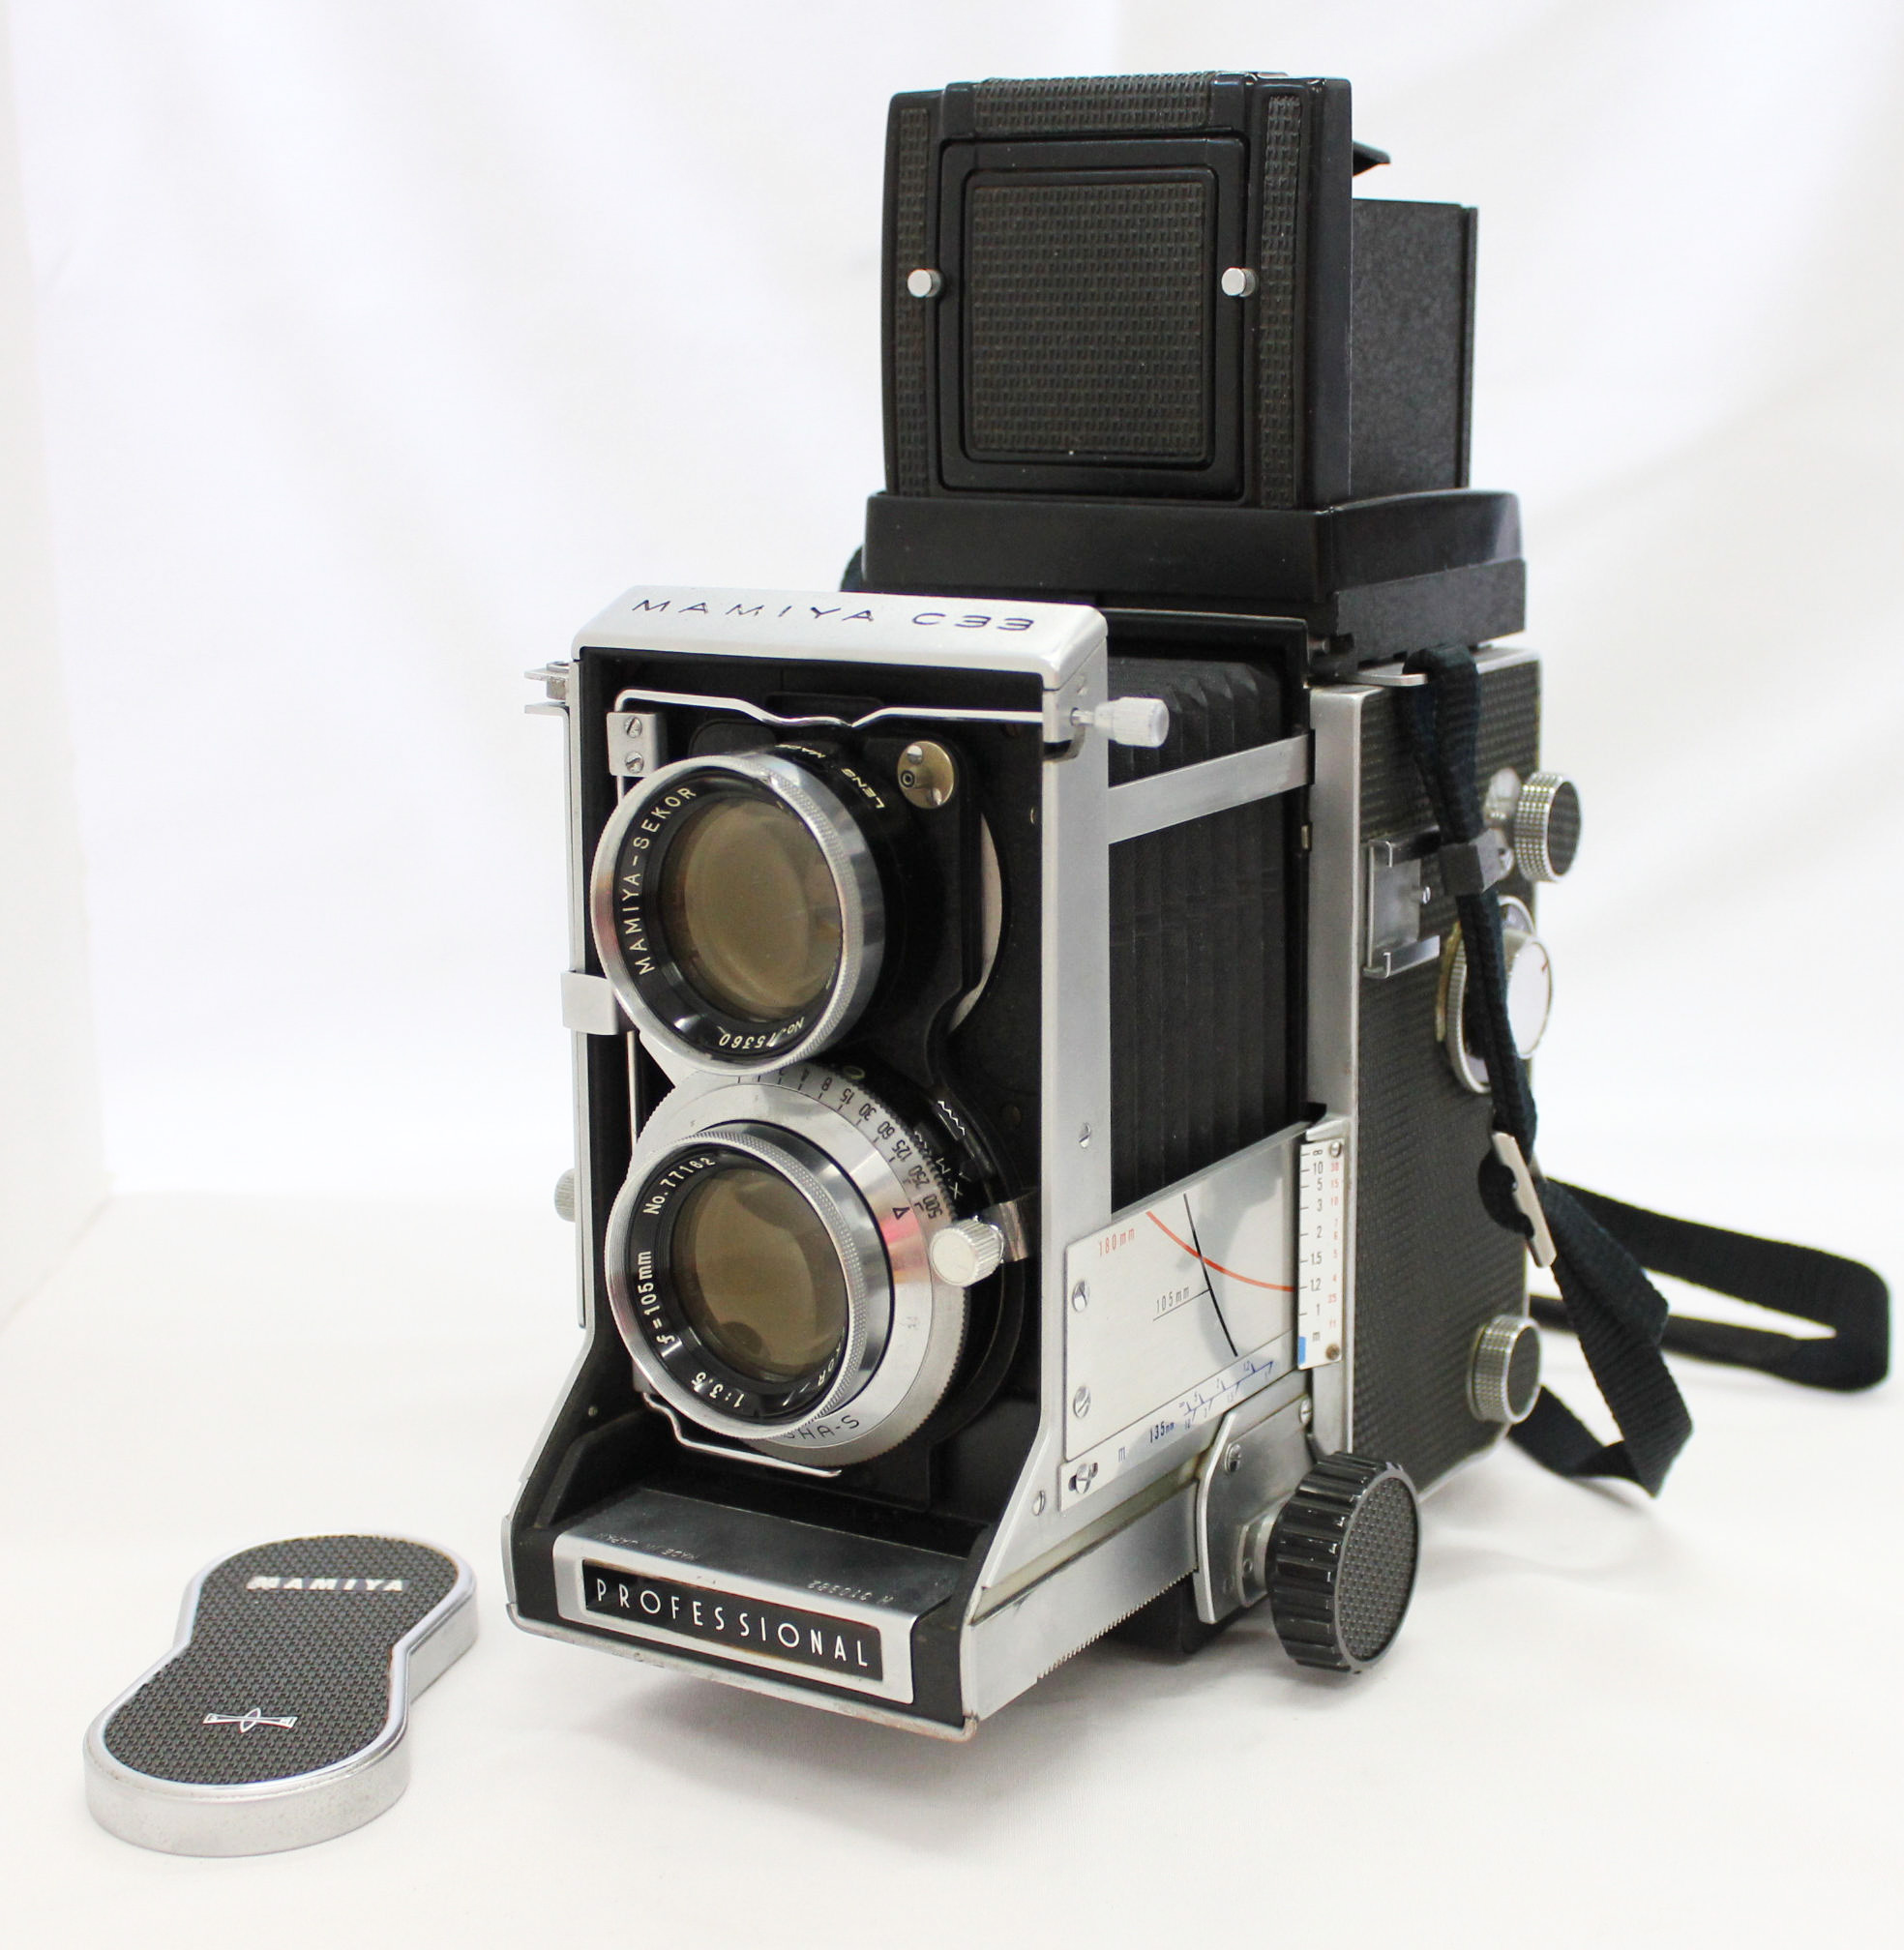 Japan Used Camera Shop | [Excellent ++++] Mamiya C33 Professional Medium Format TLR with 105mm F/3.5 Lens from Japan